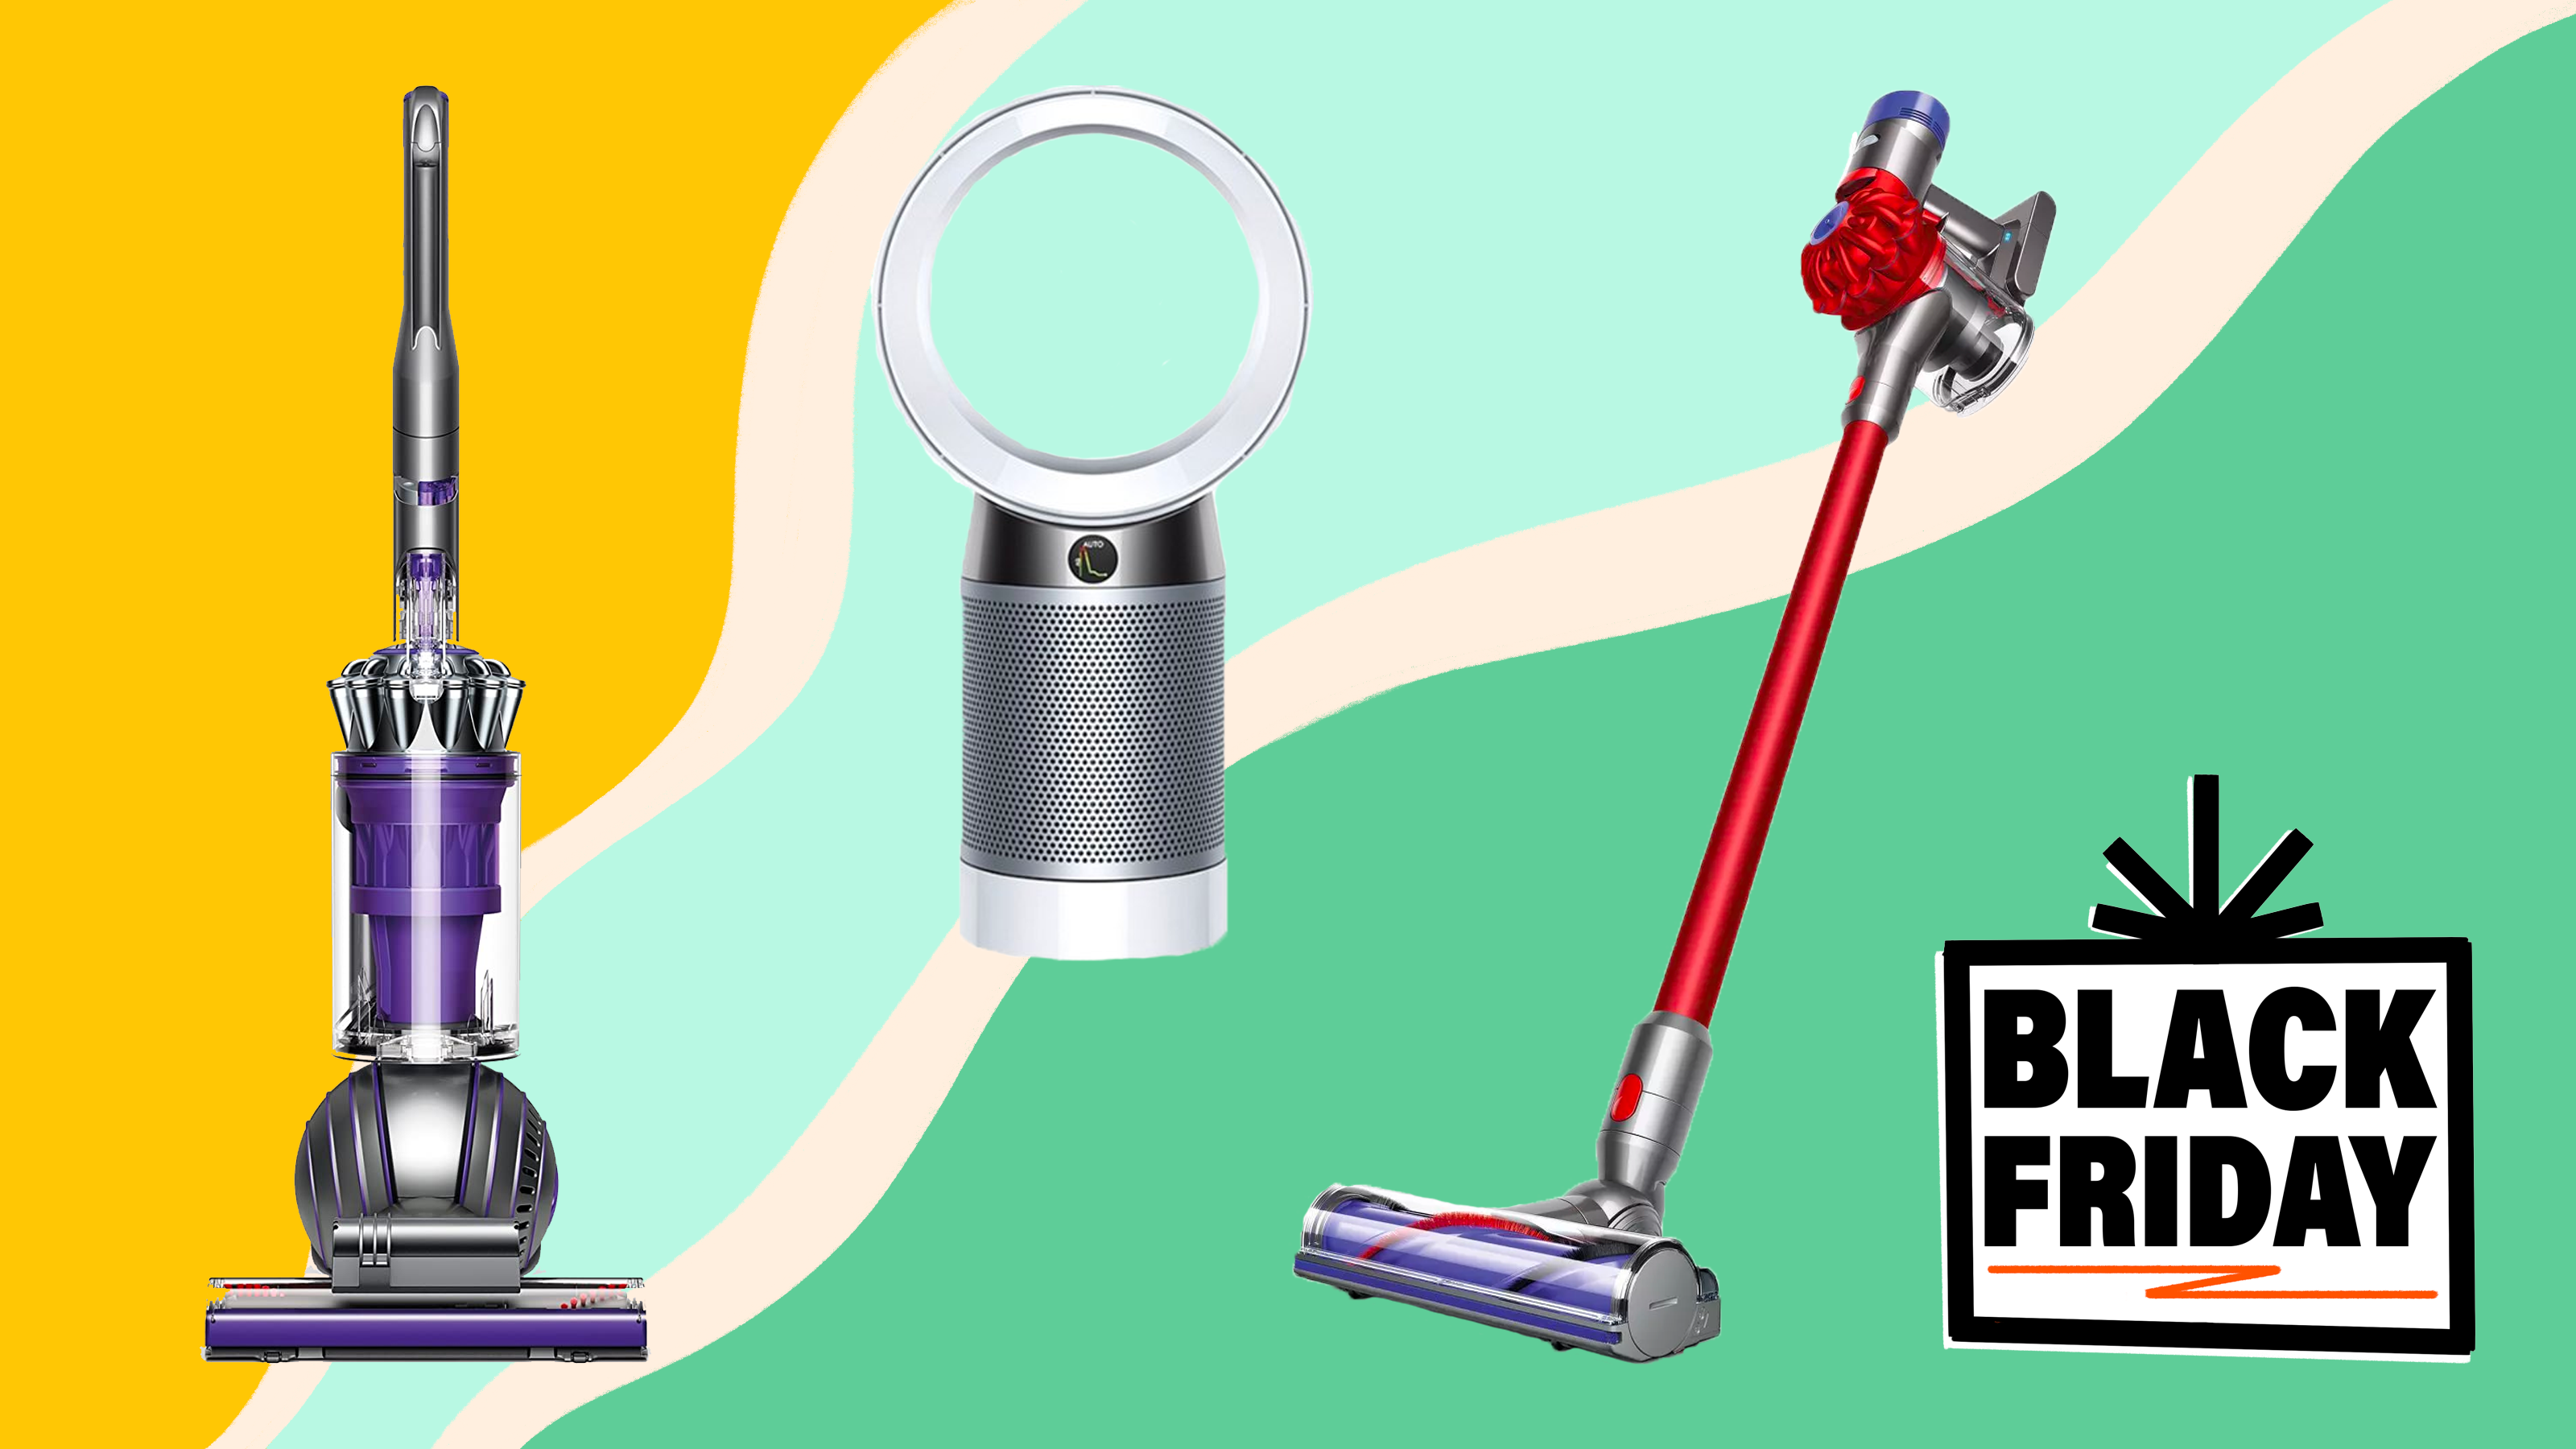 Dyson Black Friday: deals vacuums and air purifiers